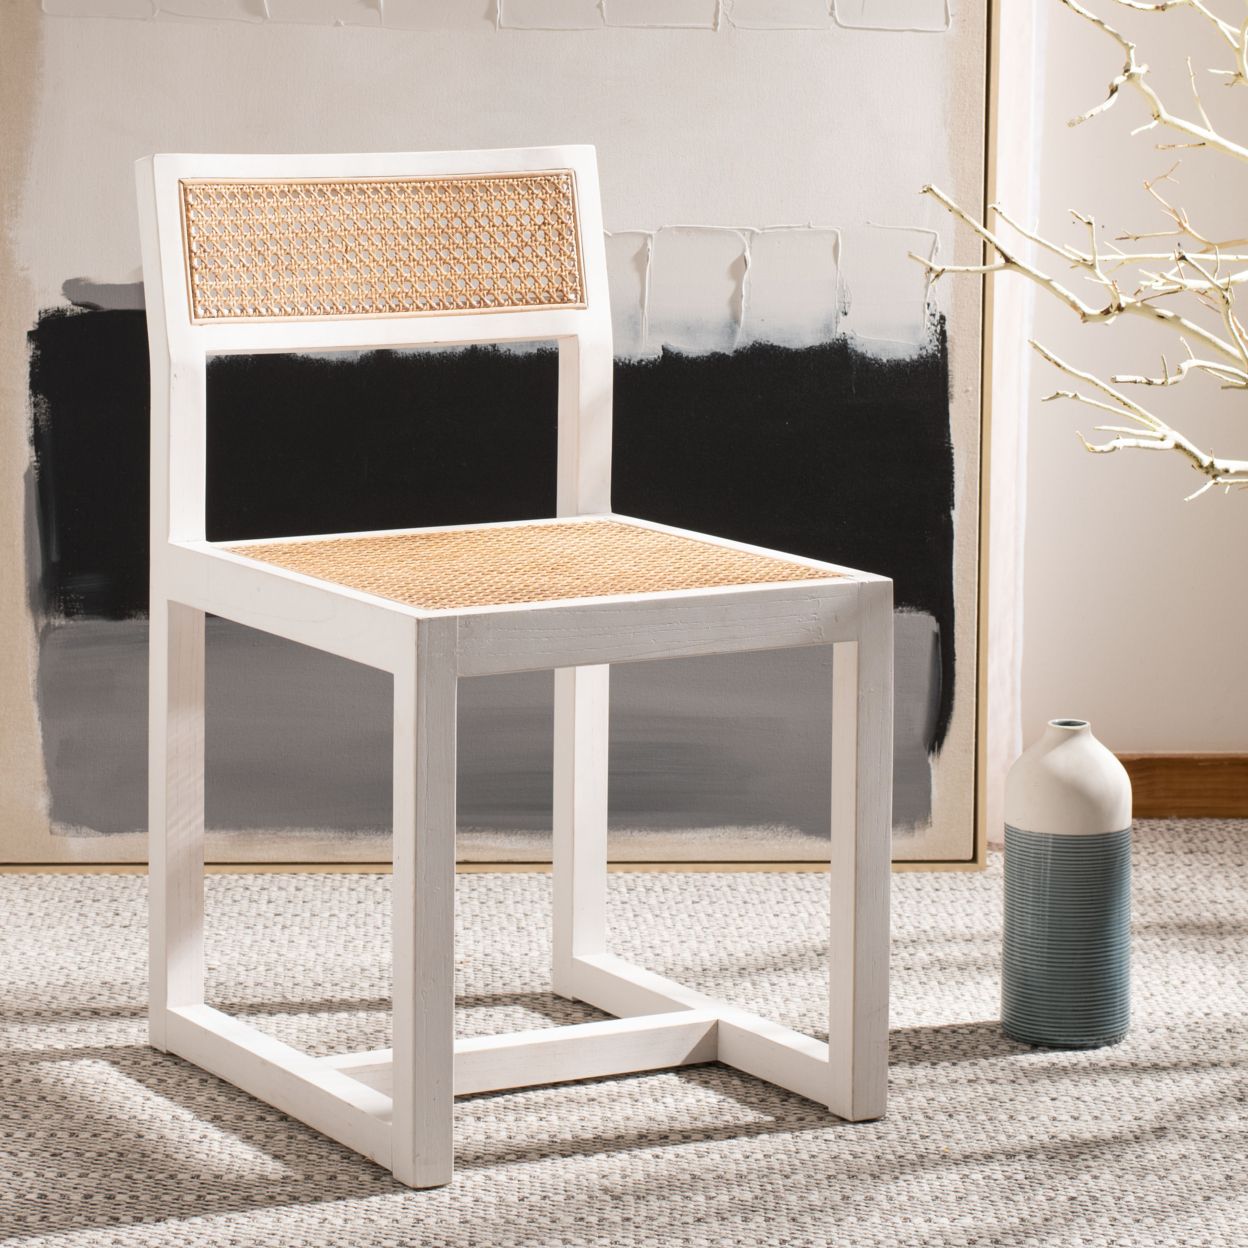 SAFAVIEH Bernice Cane Dining Chair White / Natural